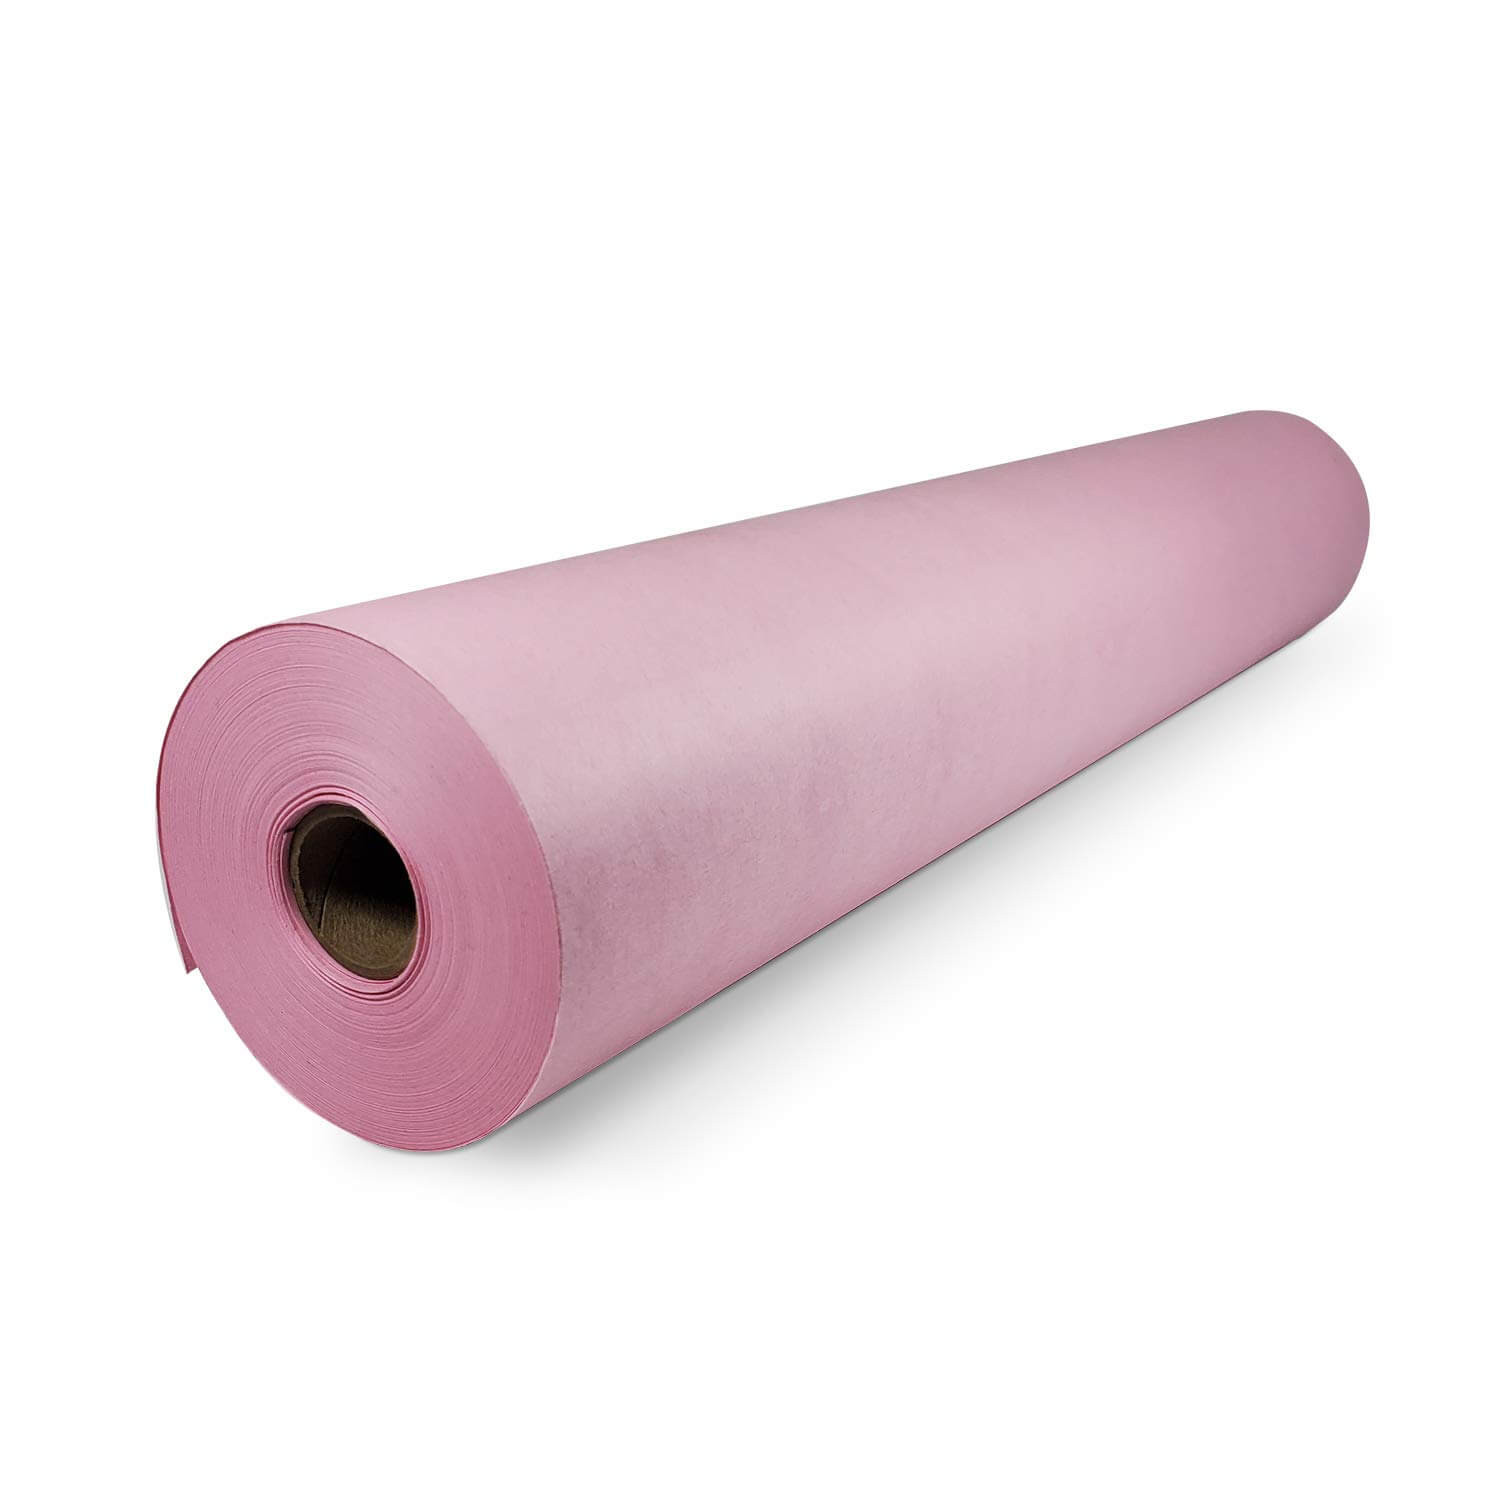 https://idlpack.com/image/cache/catalog/Products/Kraft-Paper/Pink-Butcher-Paper/Pink-Butcher-Paper-Roll-1500x1500.jpg